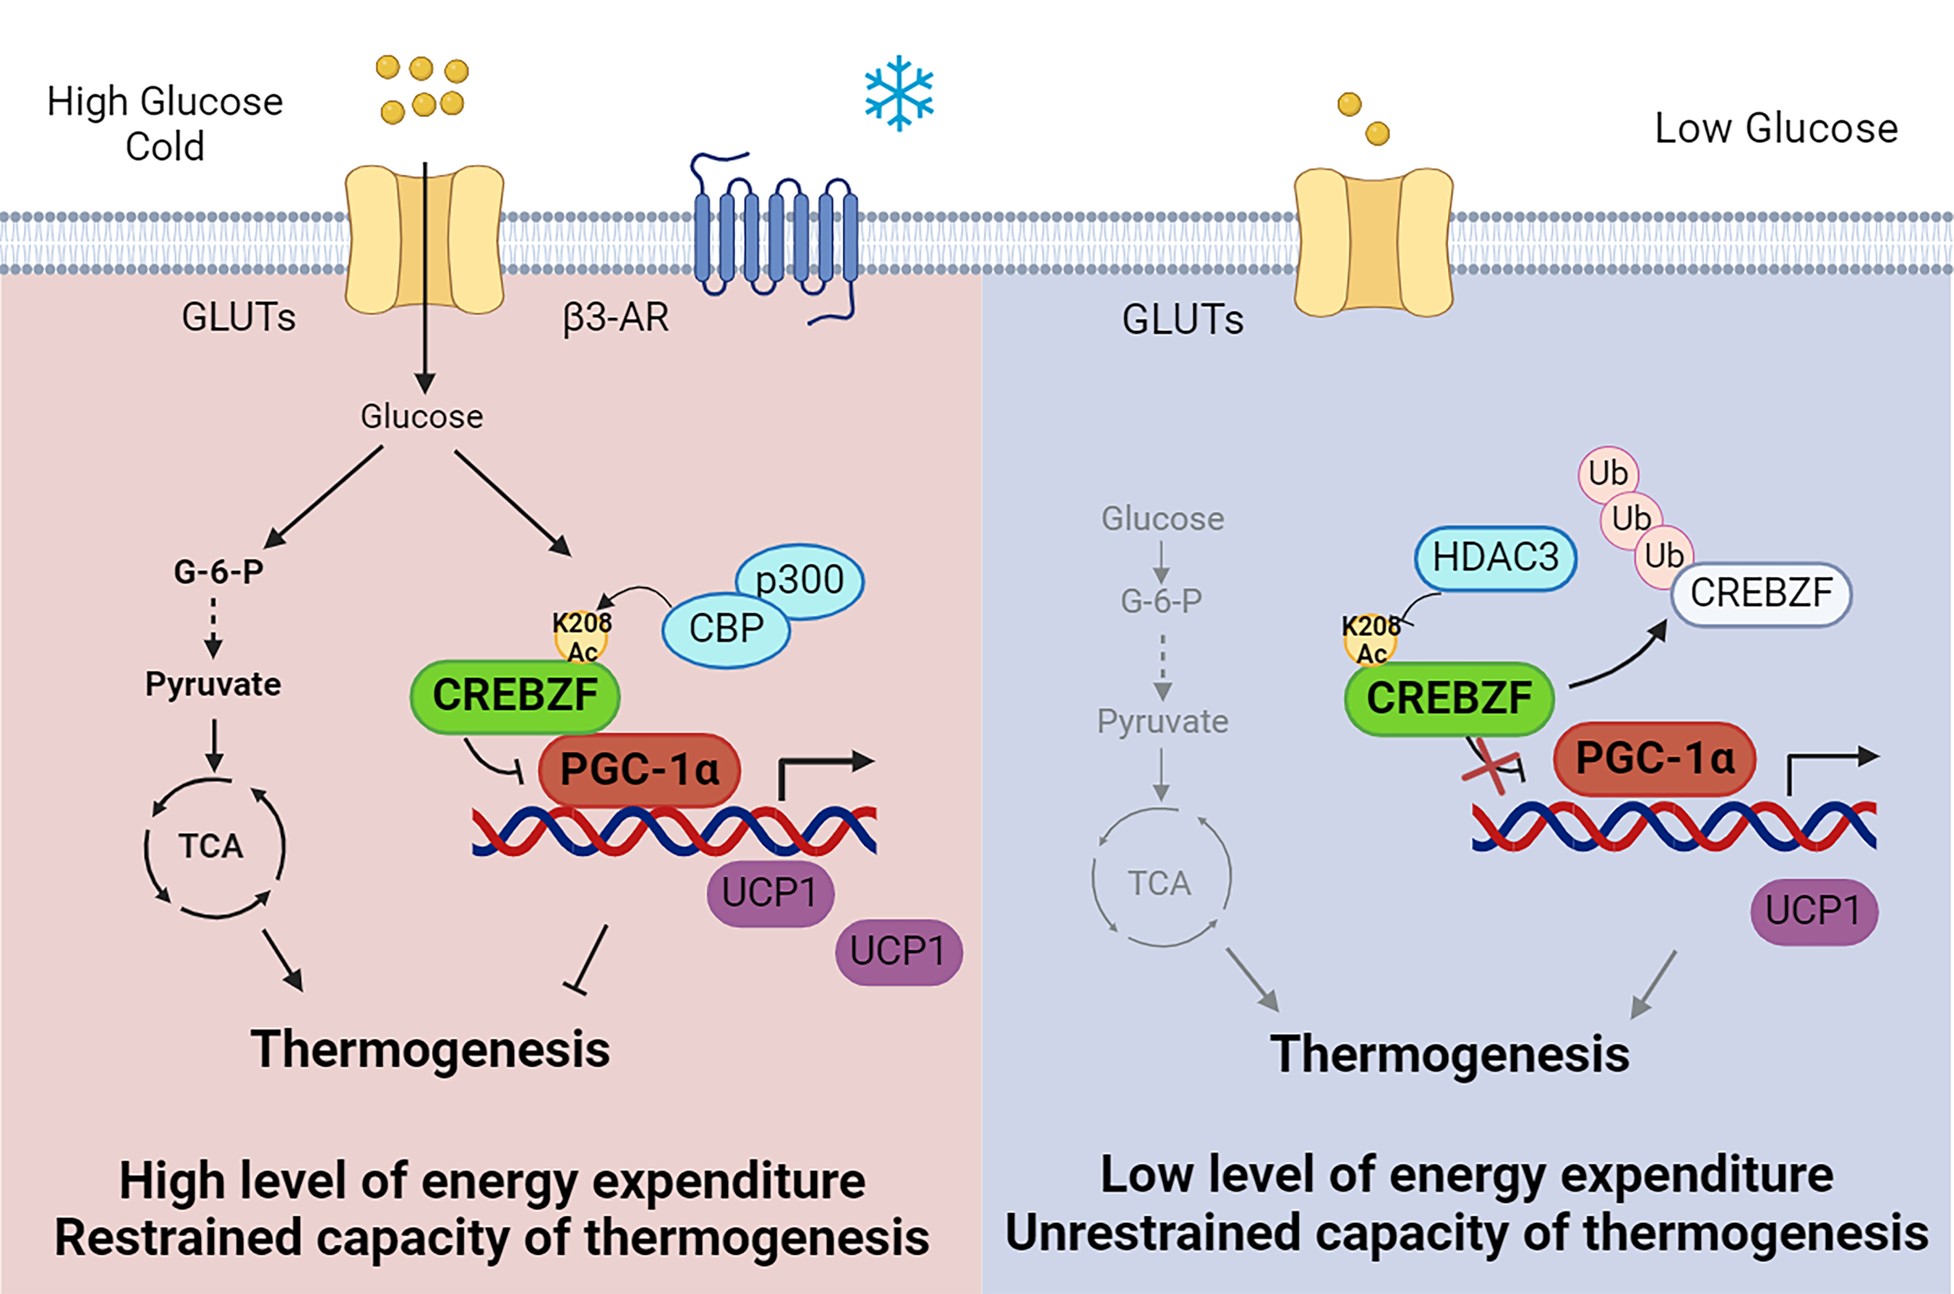 Researchers Identify Novel Mechanisms of Glucose Sensing by the Adipocyte in Regulating Thermogenesis and Energy Metabolism